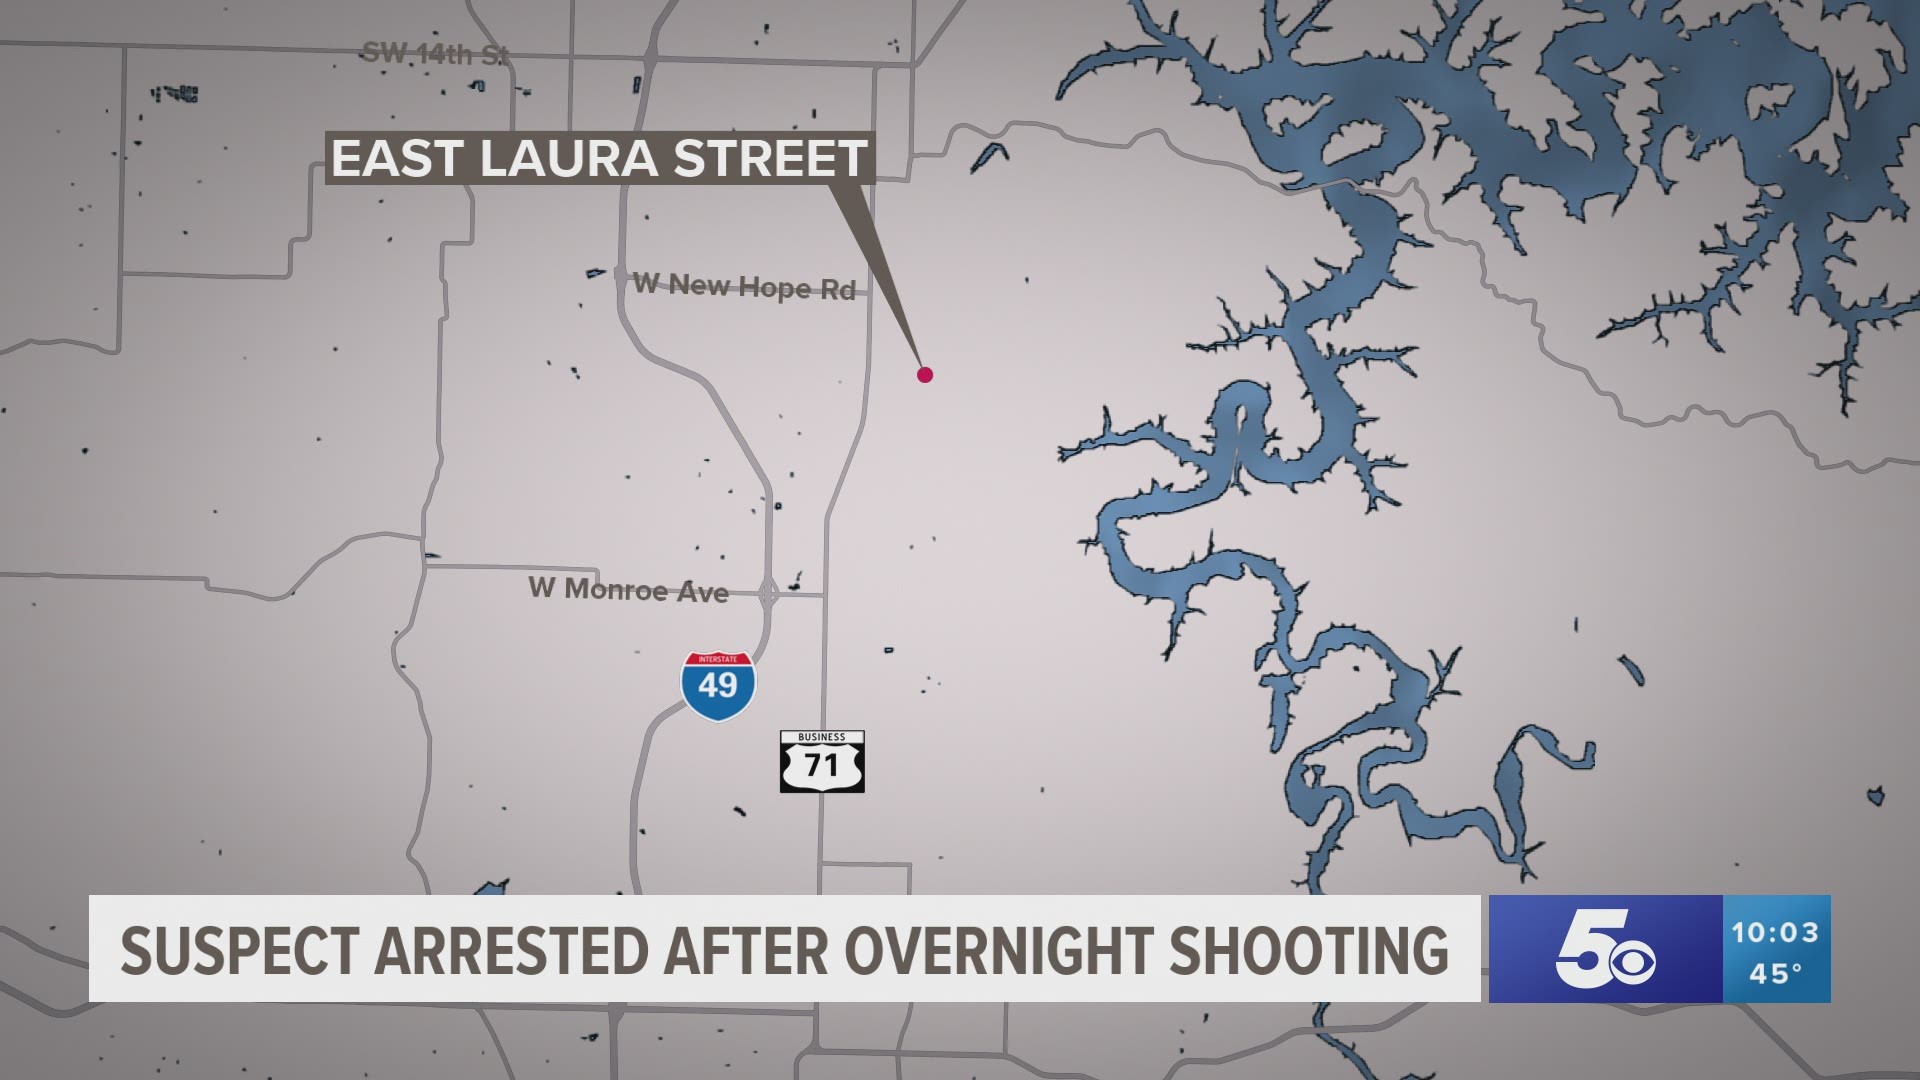 A suspect was arrested Sunday afternoon after an overnight shooting.